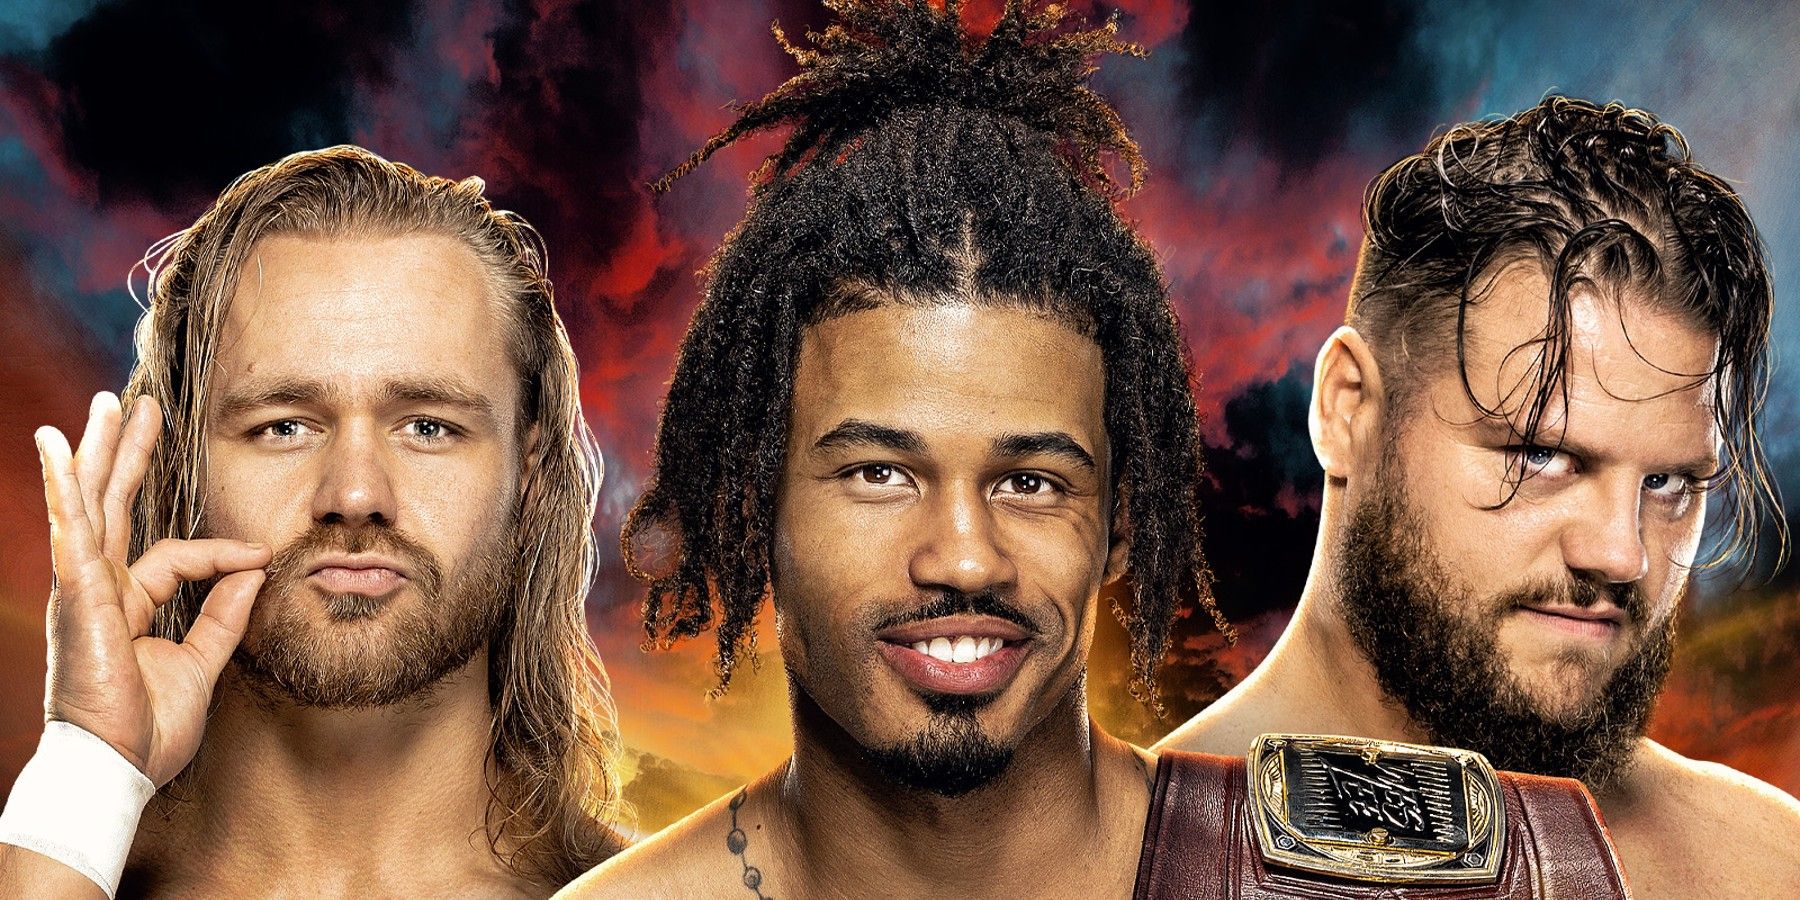 Tyler Bate, Wes Lee, and Joe Gacy NXT Battleground 2023 graphic for the North American Championship